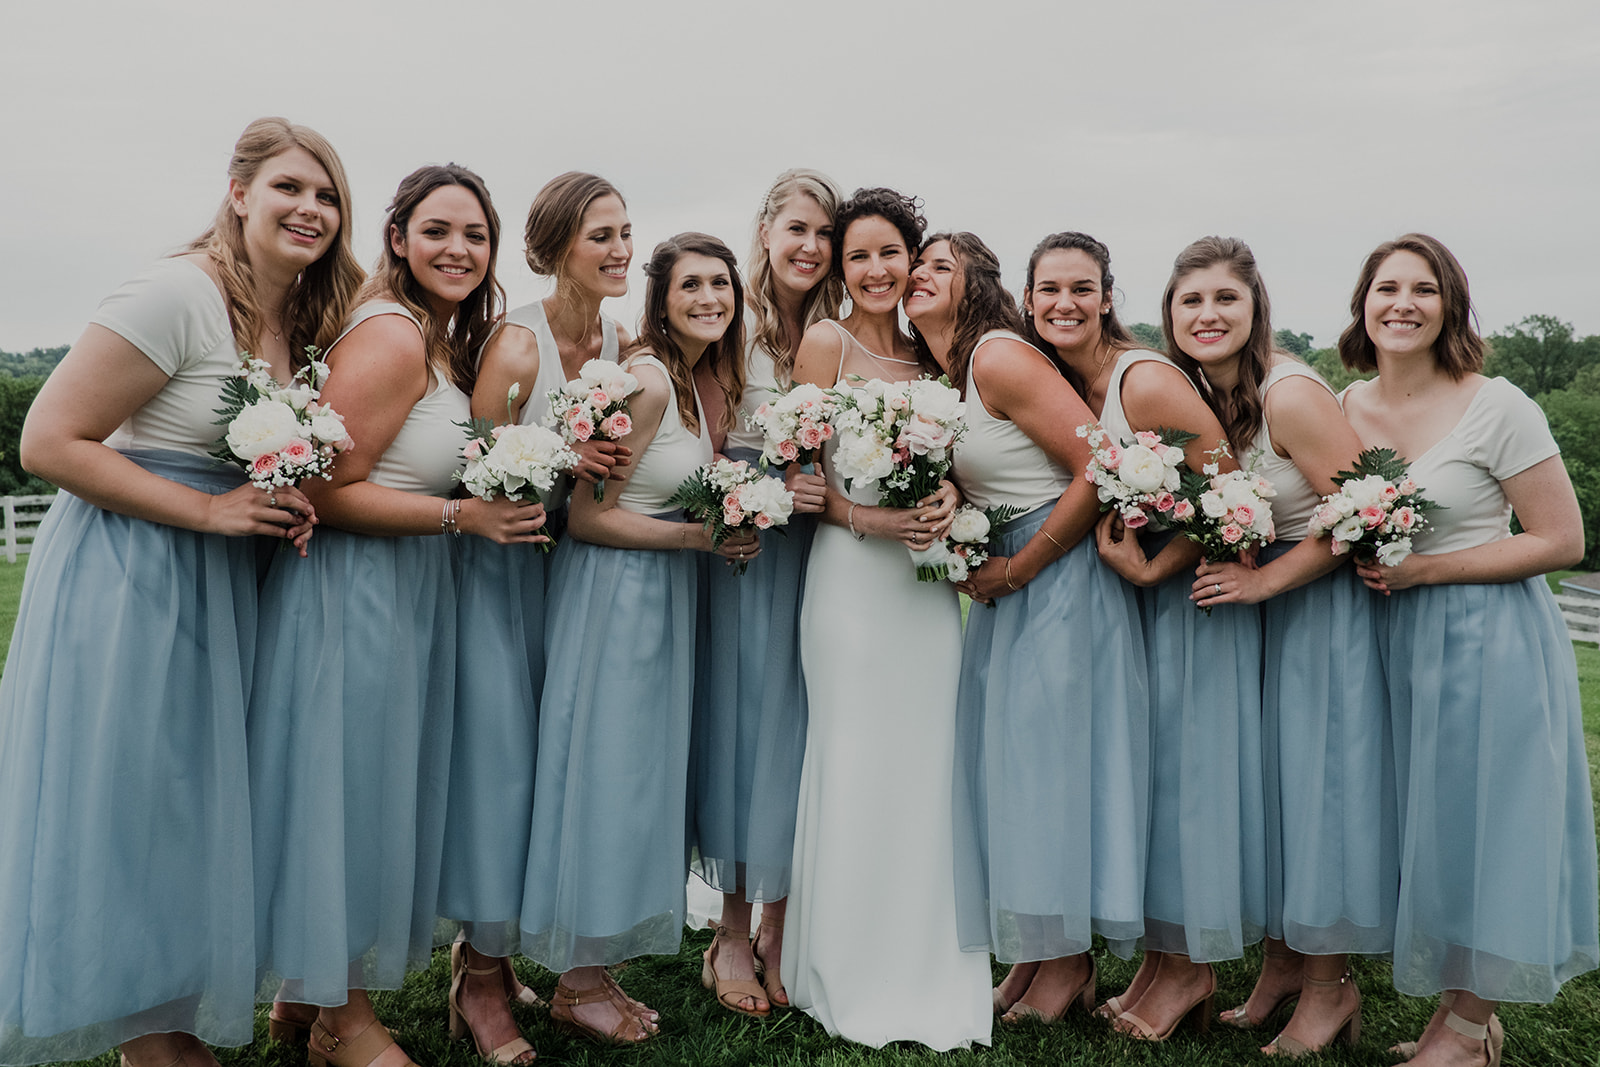 Bridesmaids gather around the bride after her outdoor wedding ceremony at Blue Hill Farm in Waterford, VA.